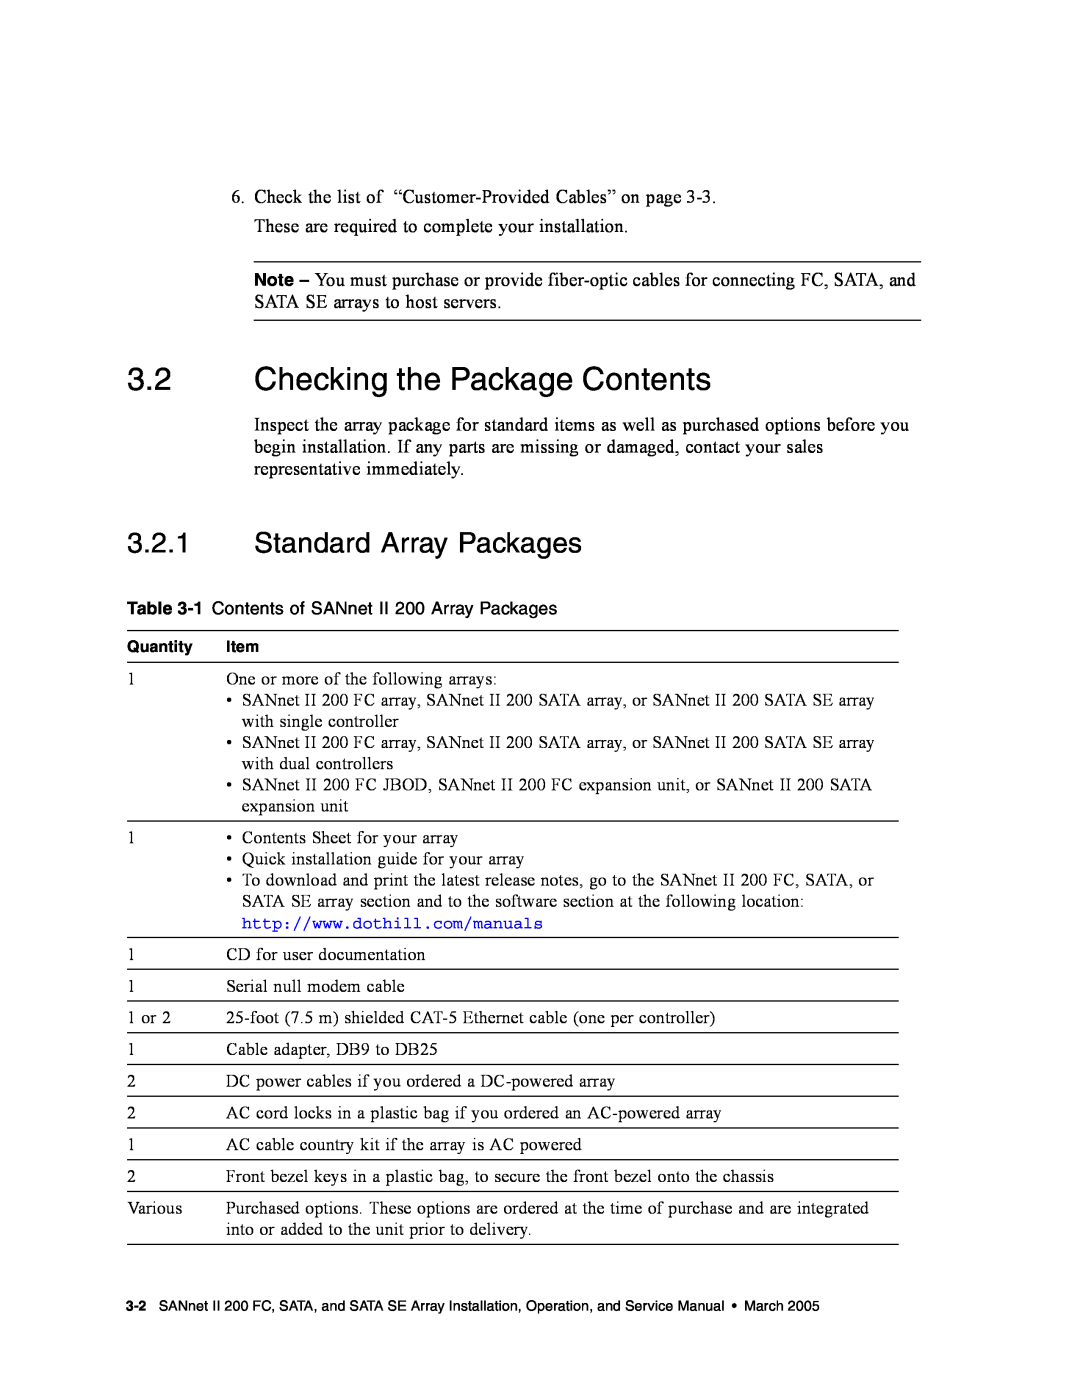 Dot Hill Systems II 200 FC service manual Checking the Package Contents, Standard Array Packages 